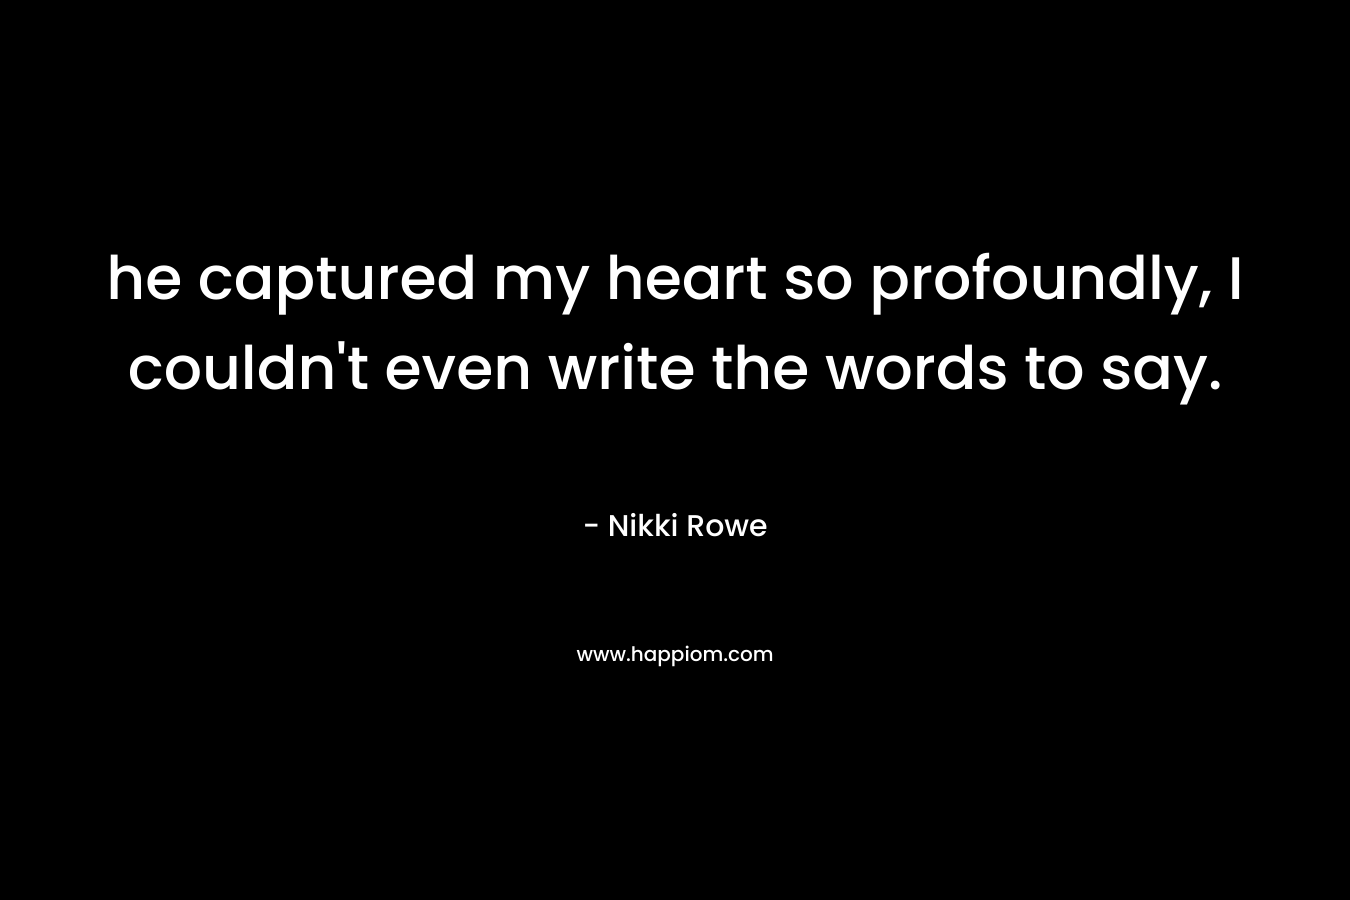 he captured my heart so profoundly, I couldn’t even write the words to say. – Nikki Rowe